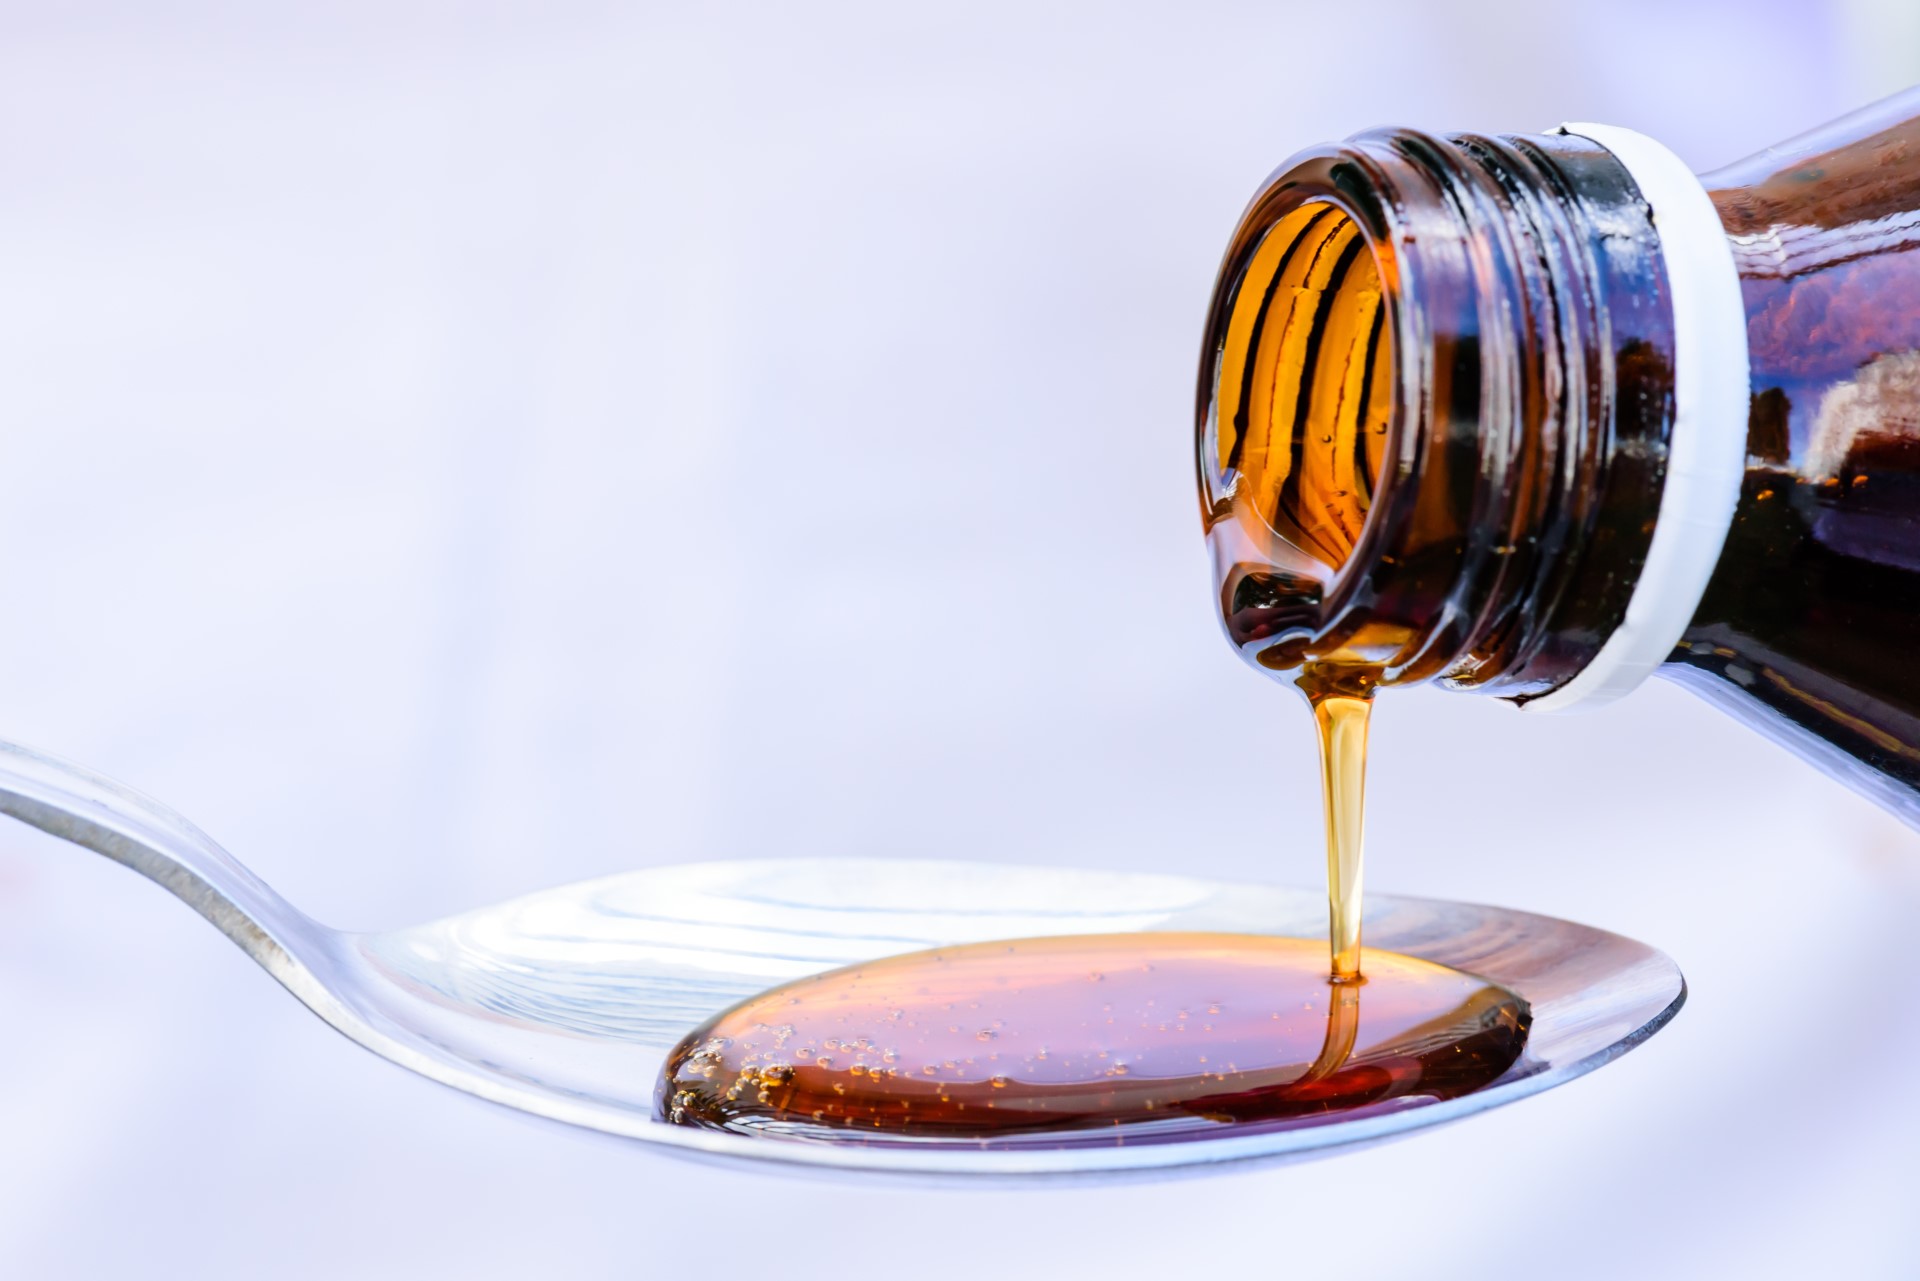 cough syrup poured on spoon - most commonly abused OTC medications concept